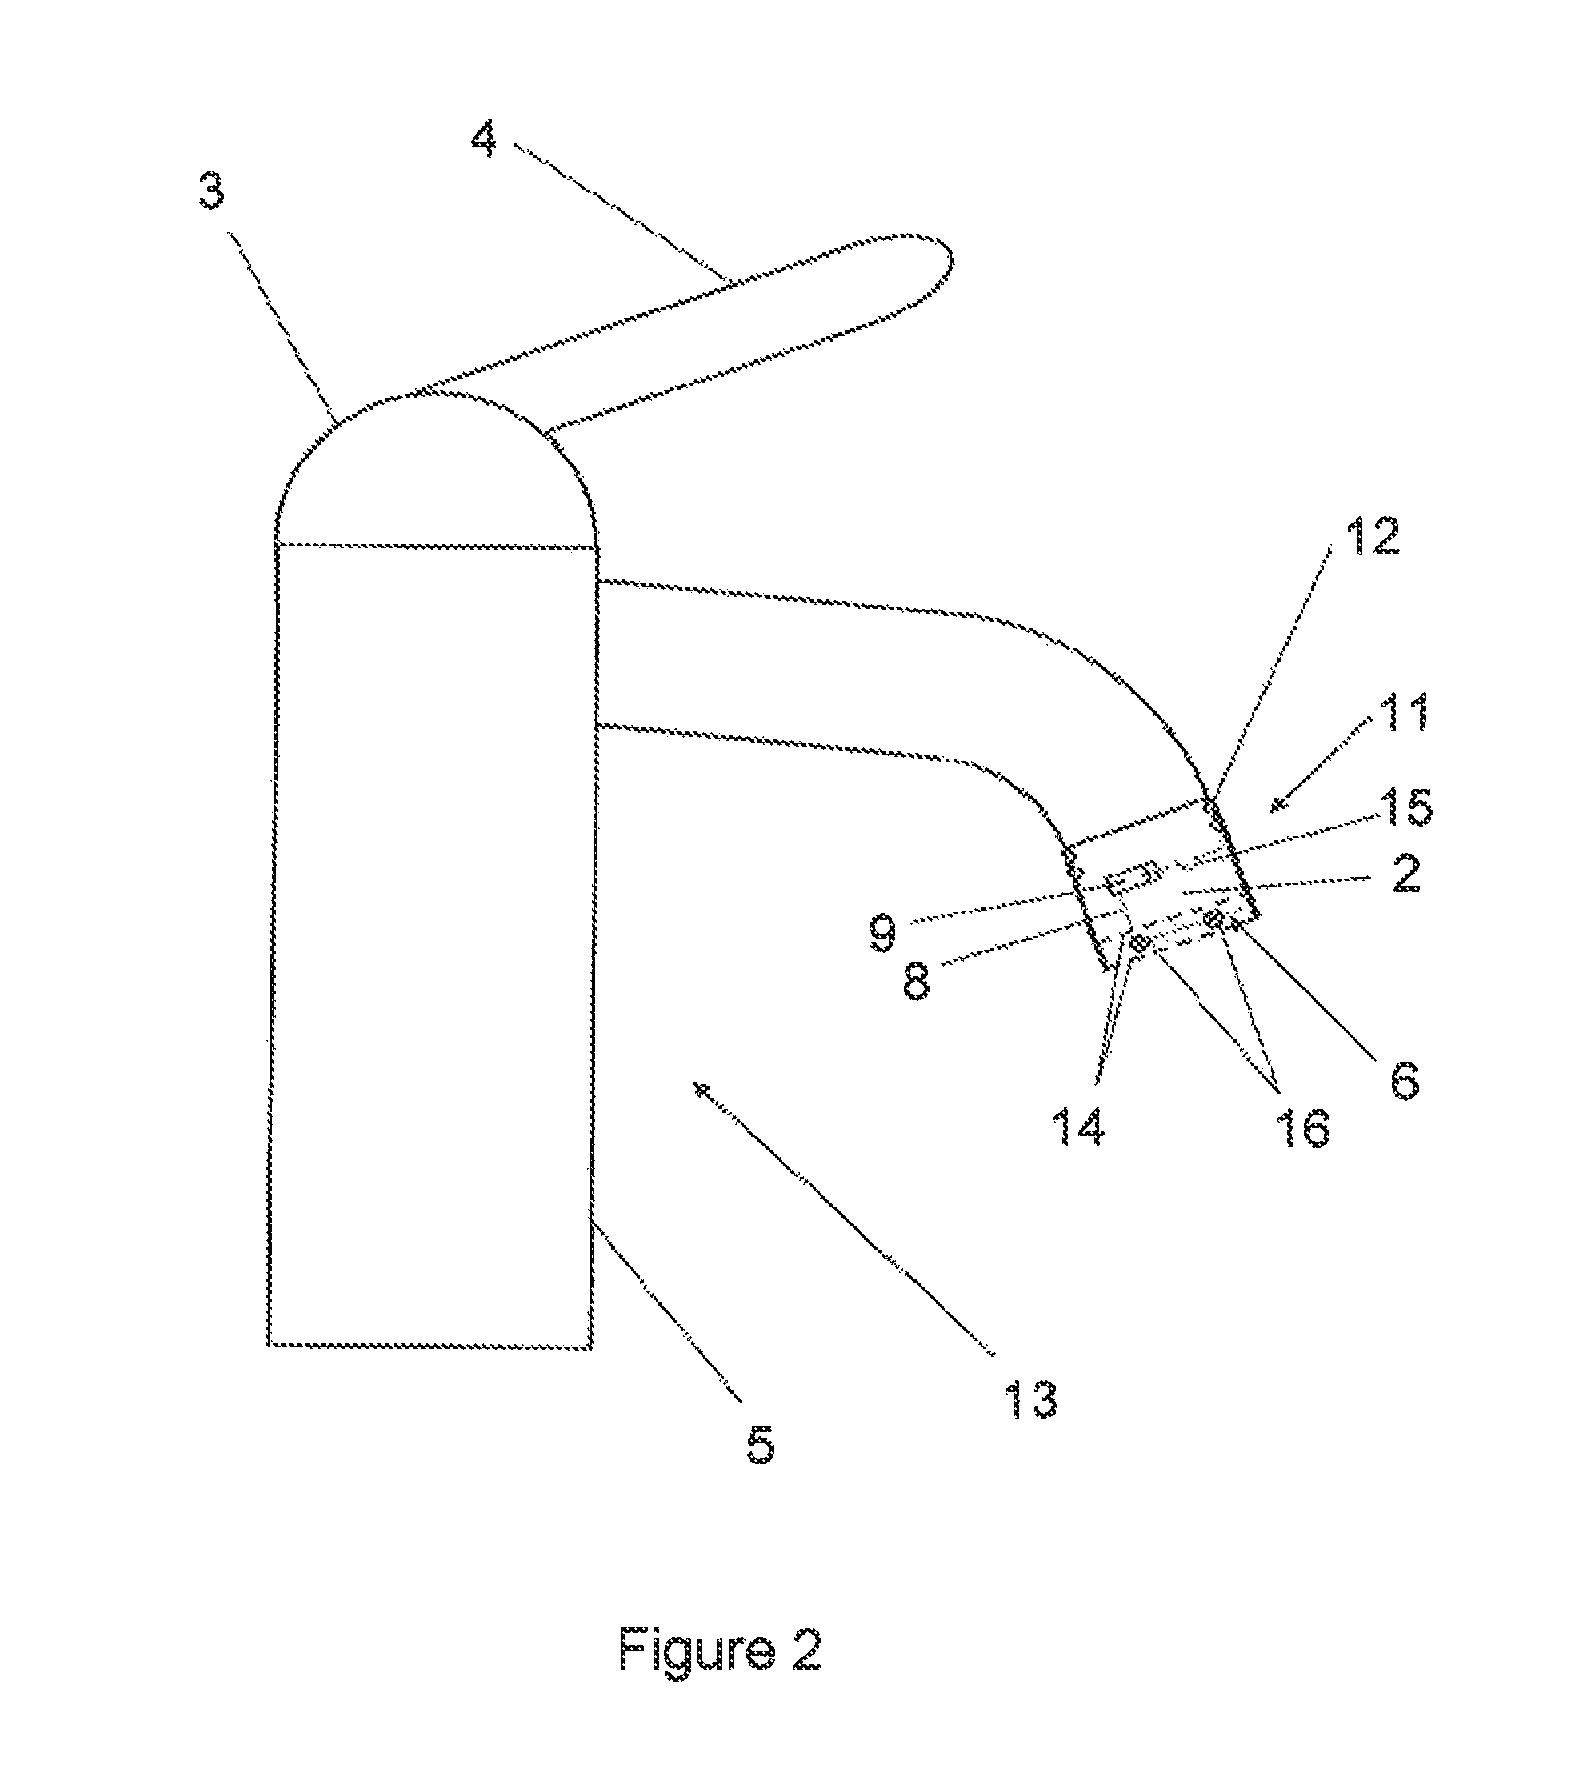 Disinfecting device having a power supply and a fluid outlet